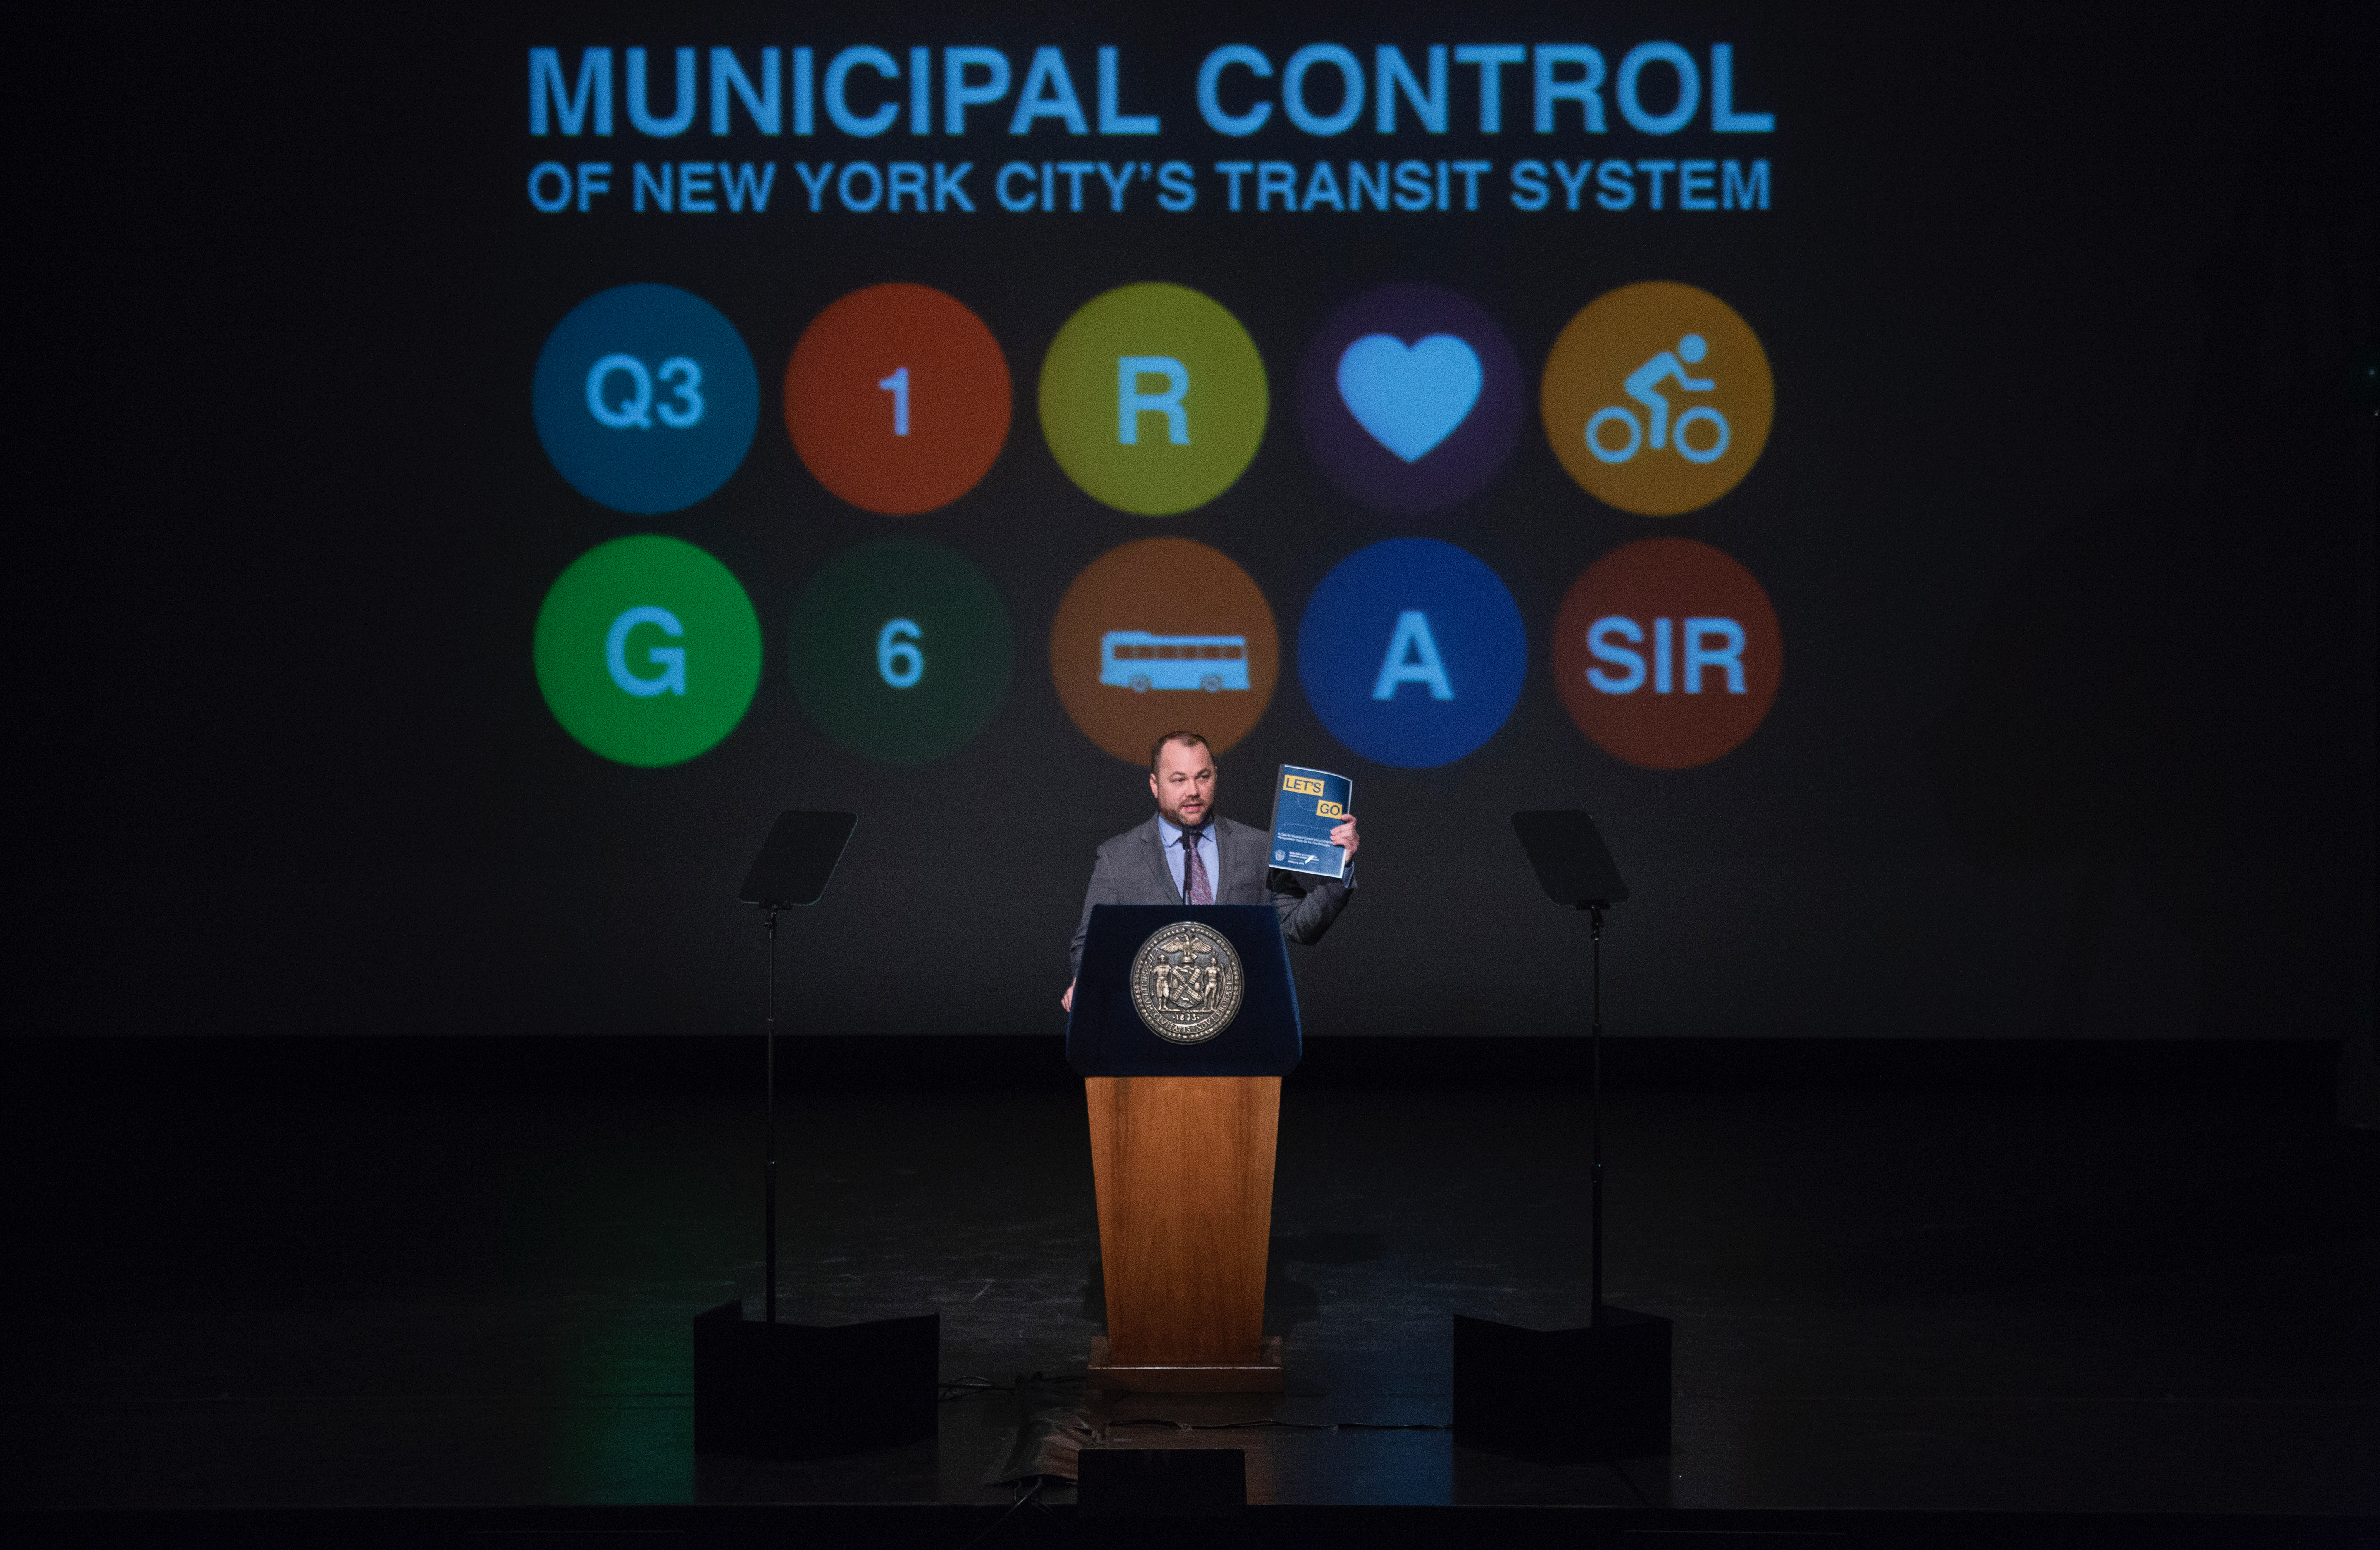 City Council Speaker Corey Johnson called for scrapping the MTA and taking control of the city’s dysfunctional mass transit system in his first State of the City speech on Tuesday. Photo courtesy of Speaker Corey Johnson